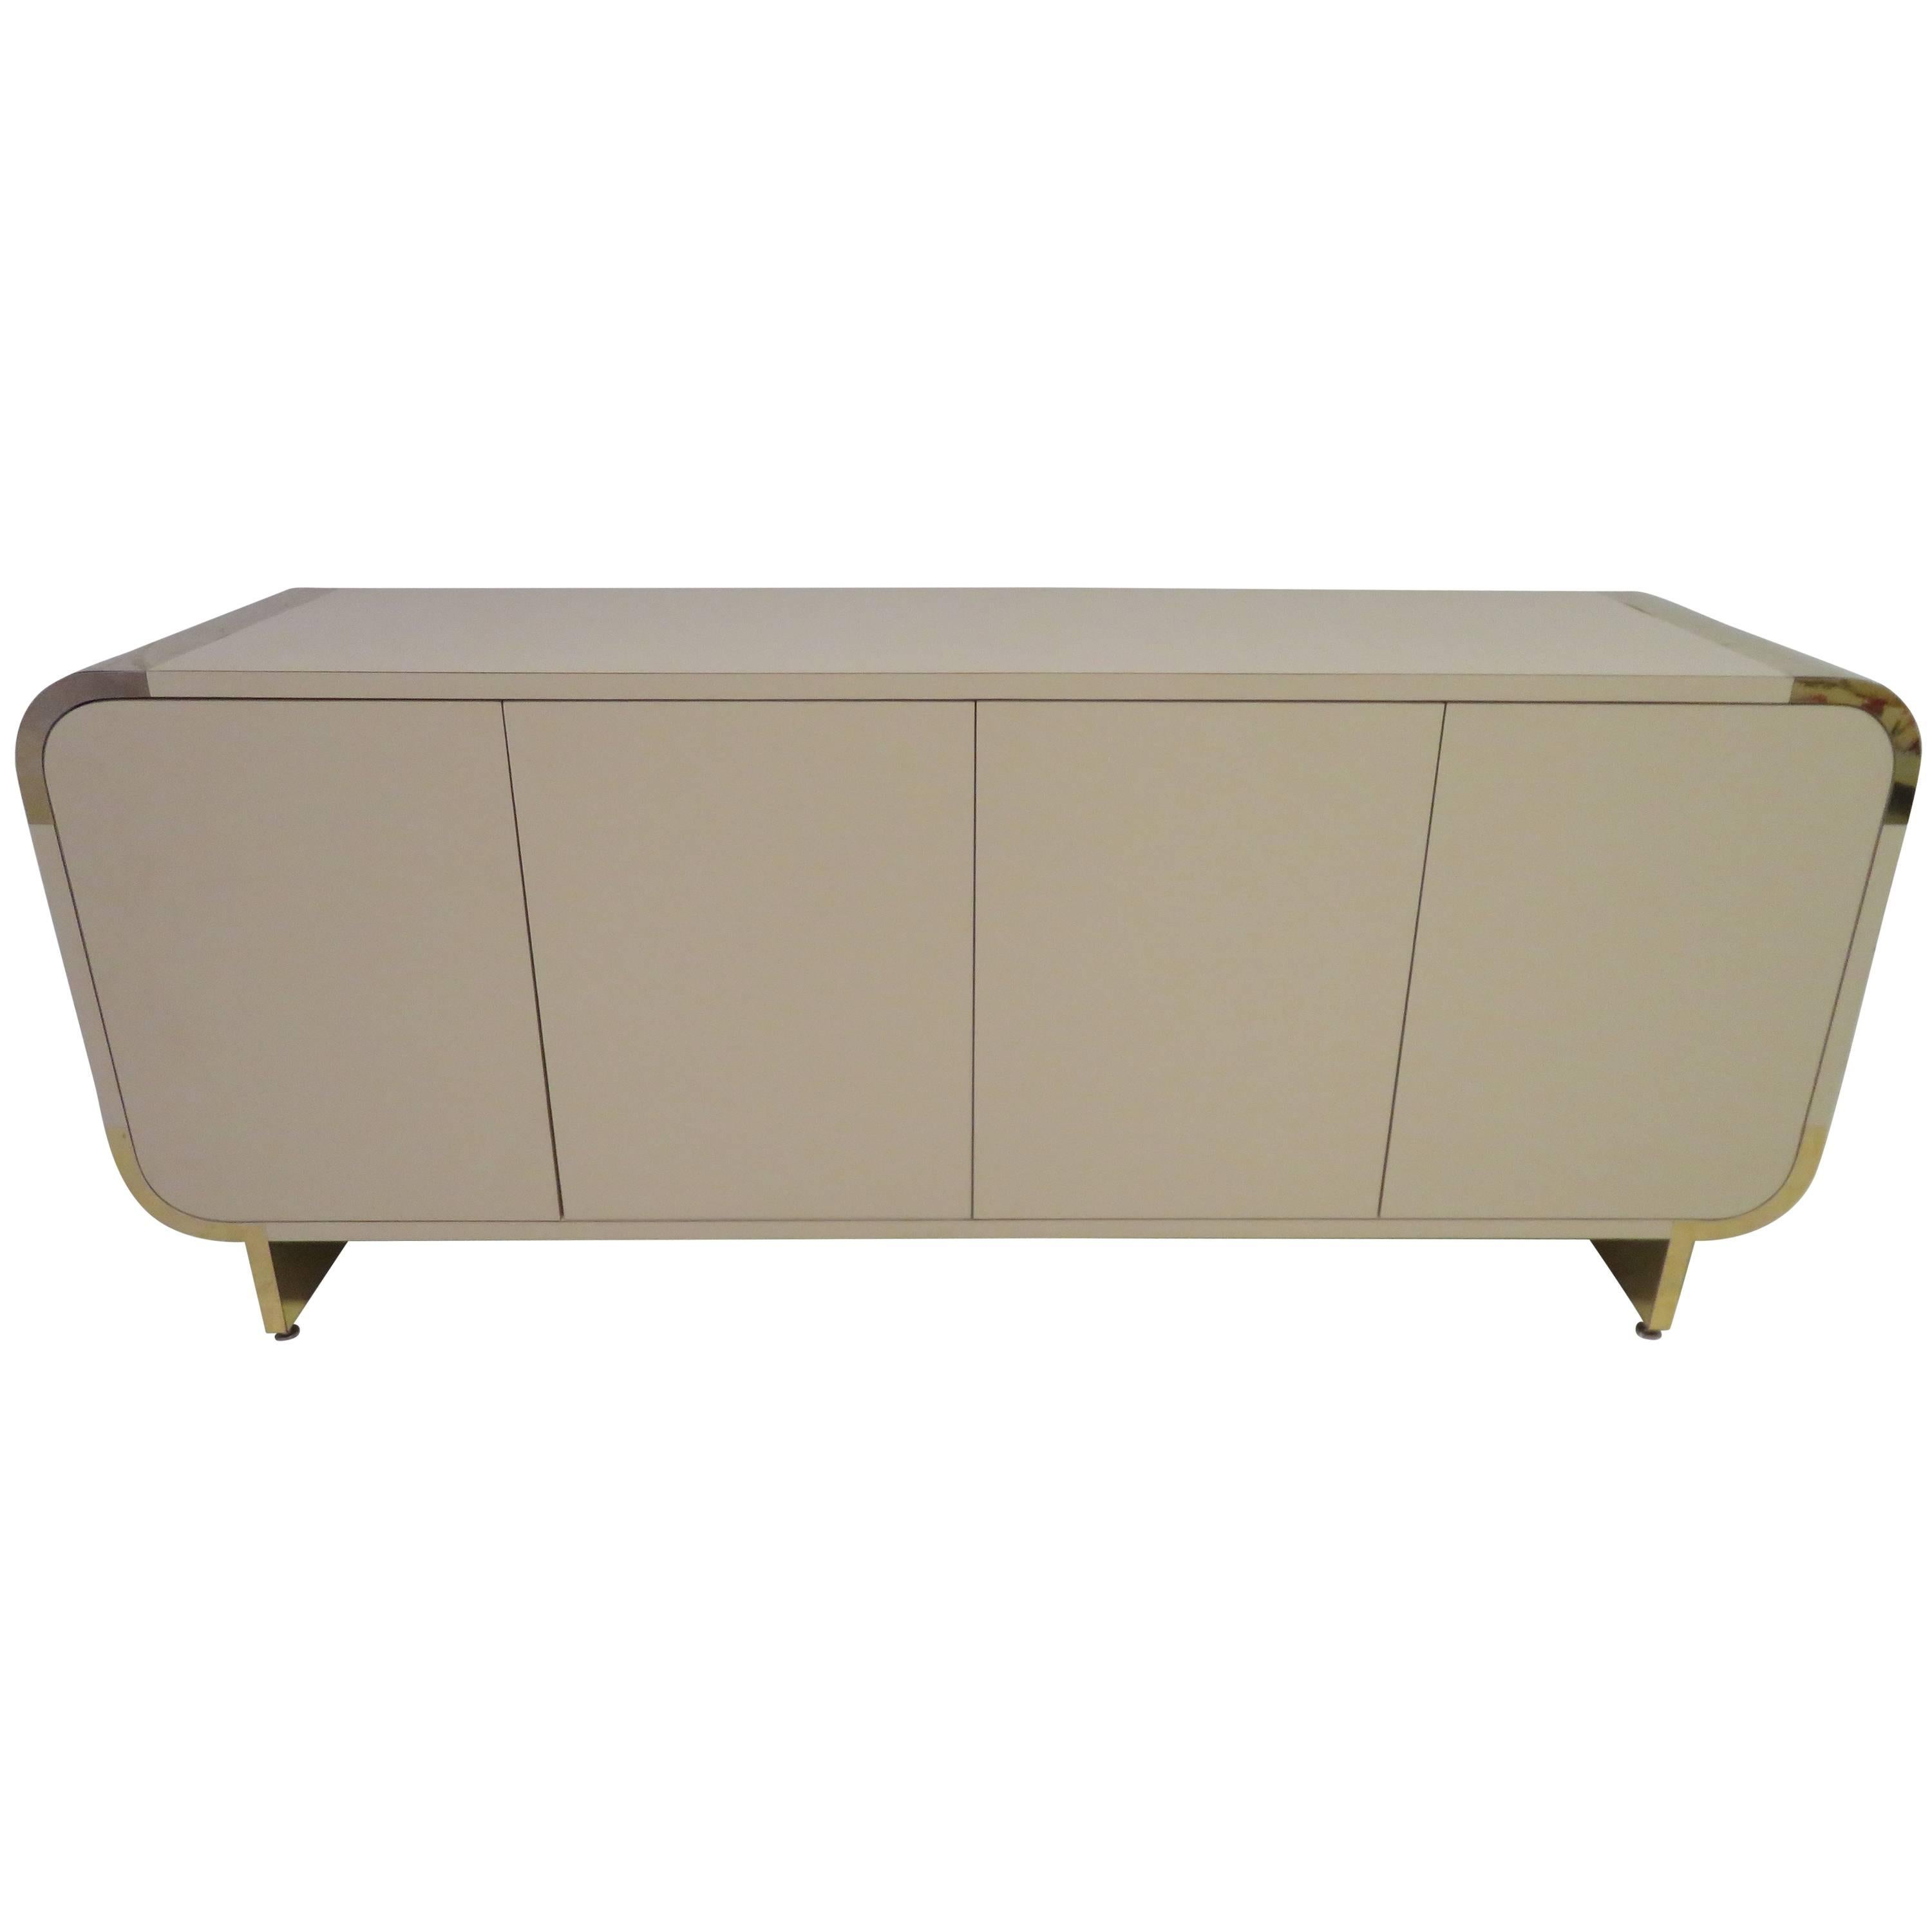 Unusual Pace Collection Curved Edge Credenza, Mid-Century Modern